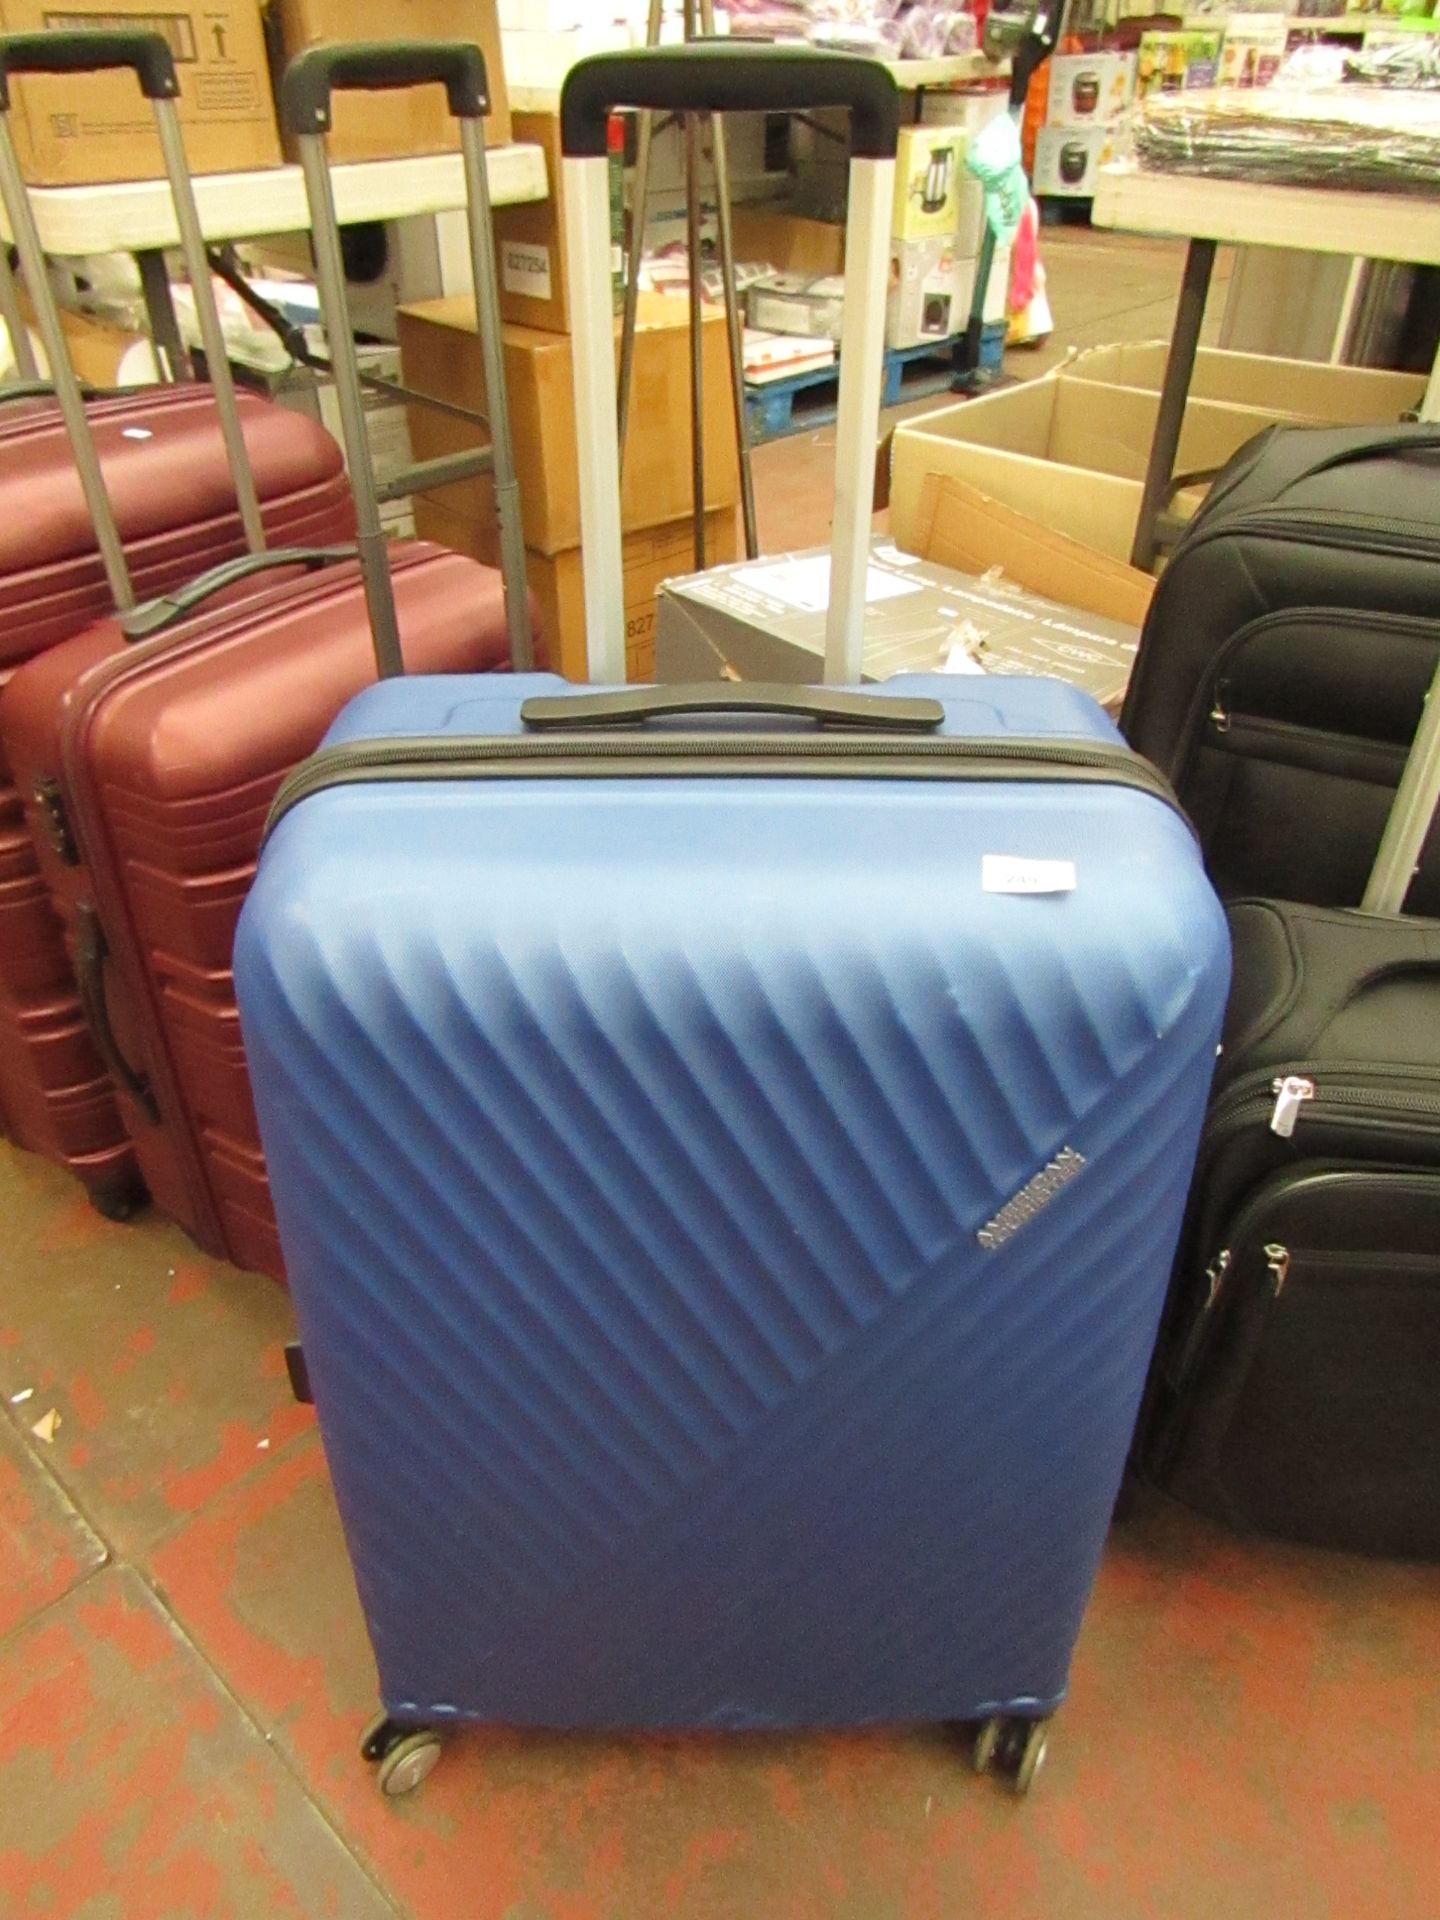 American Tourister Large Size Suitcase. Has a couple of little scuffs but nothing major.